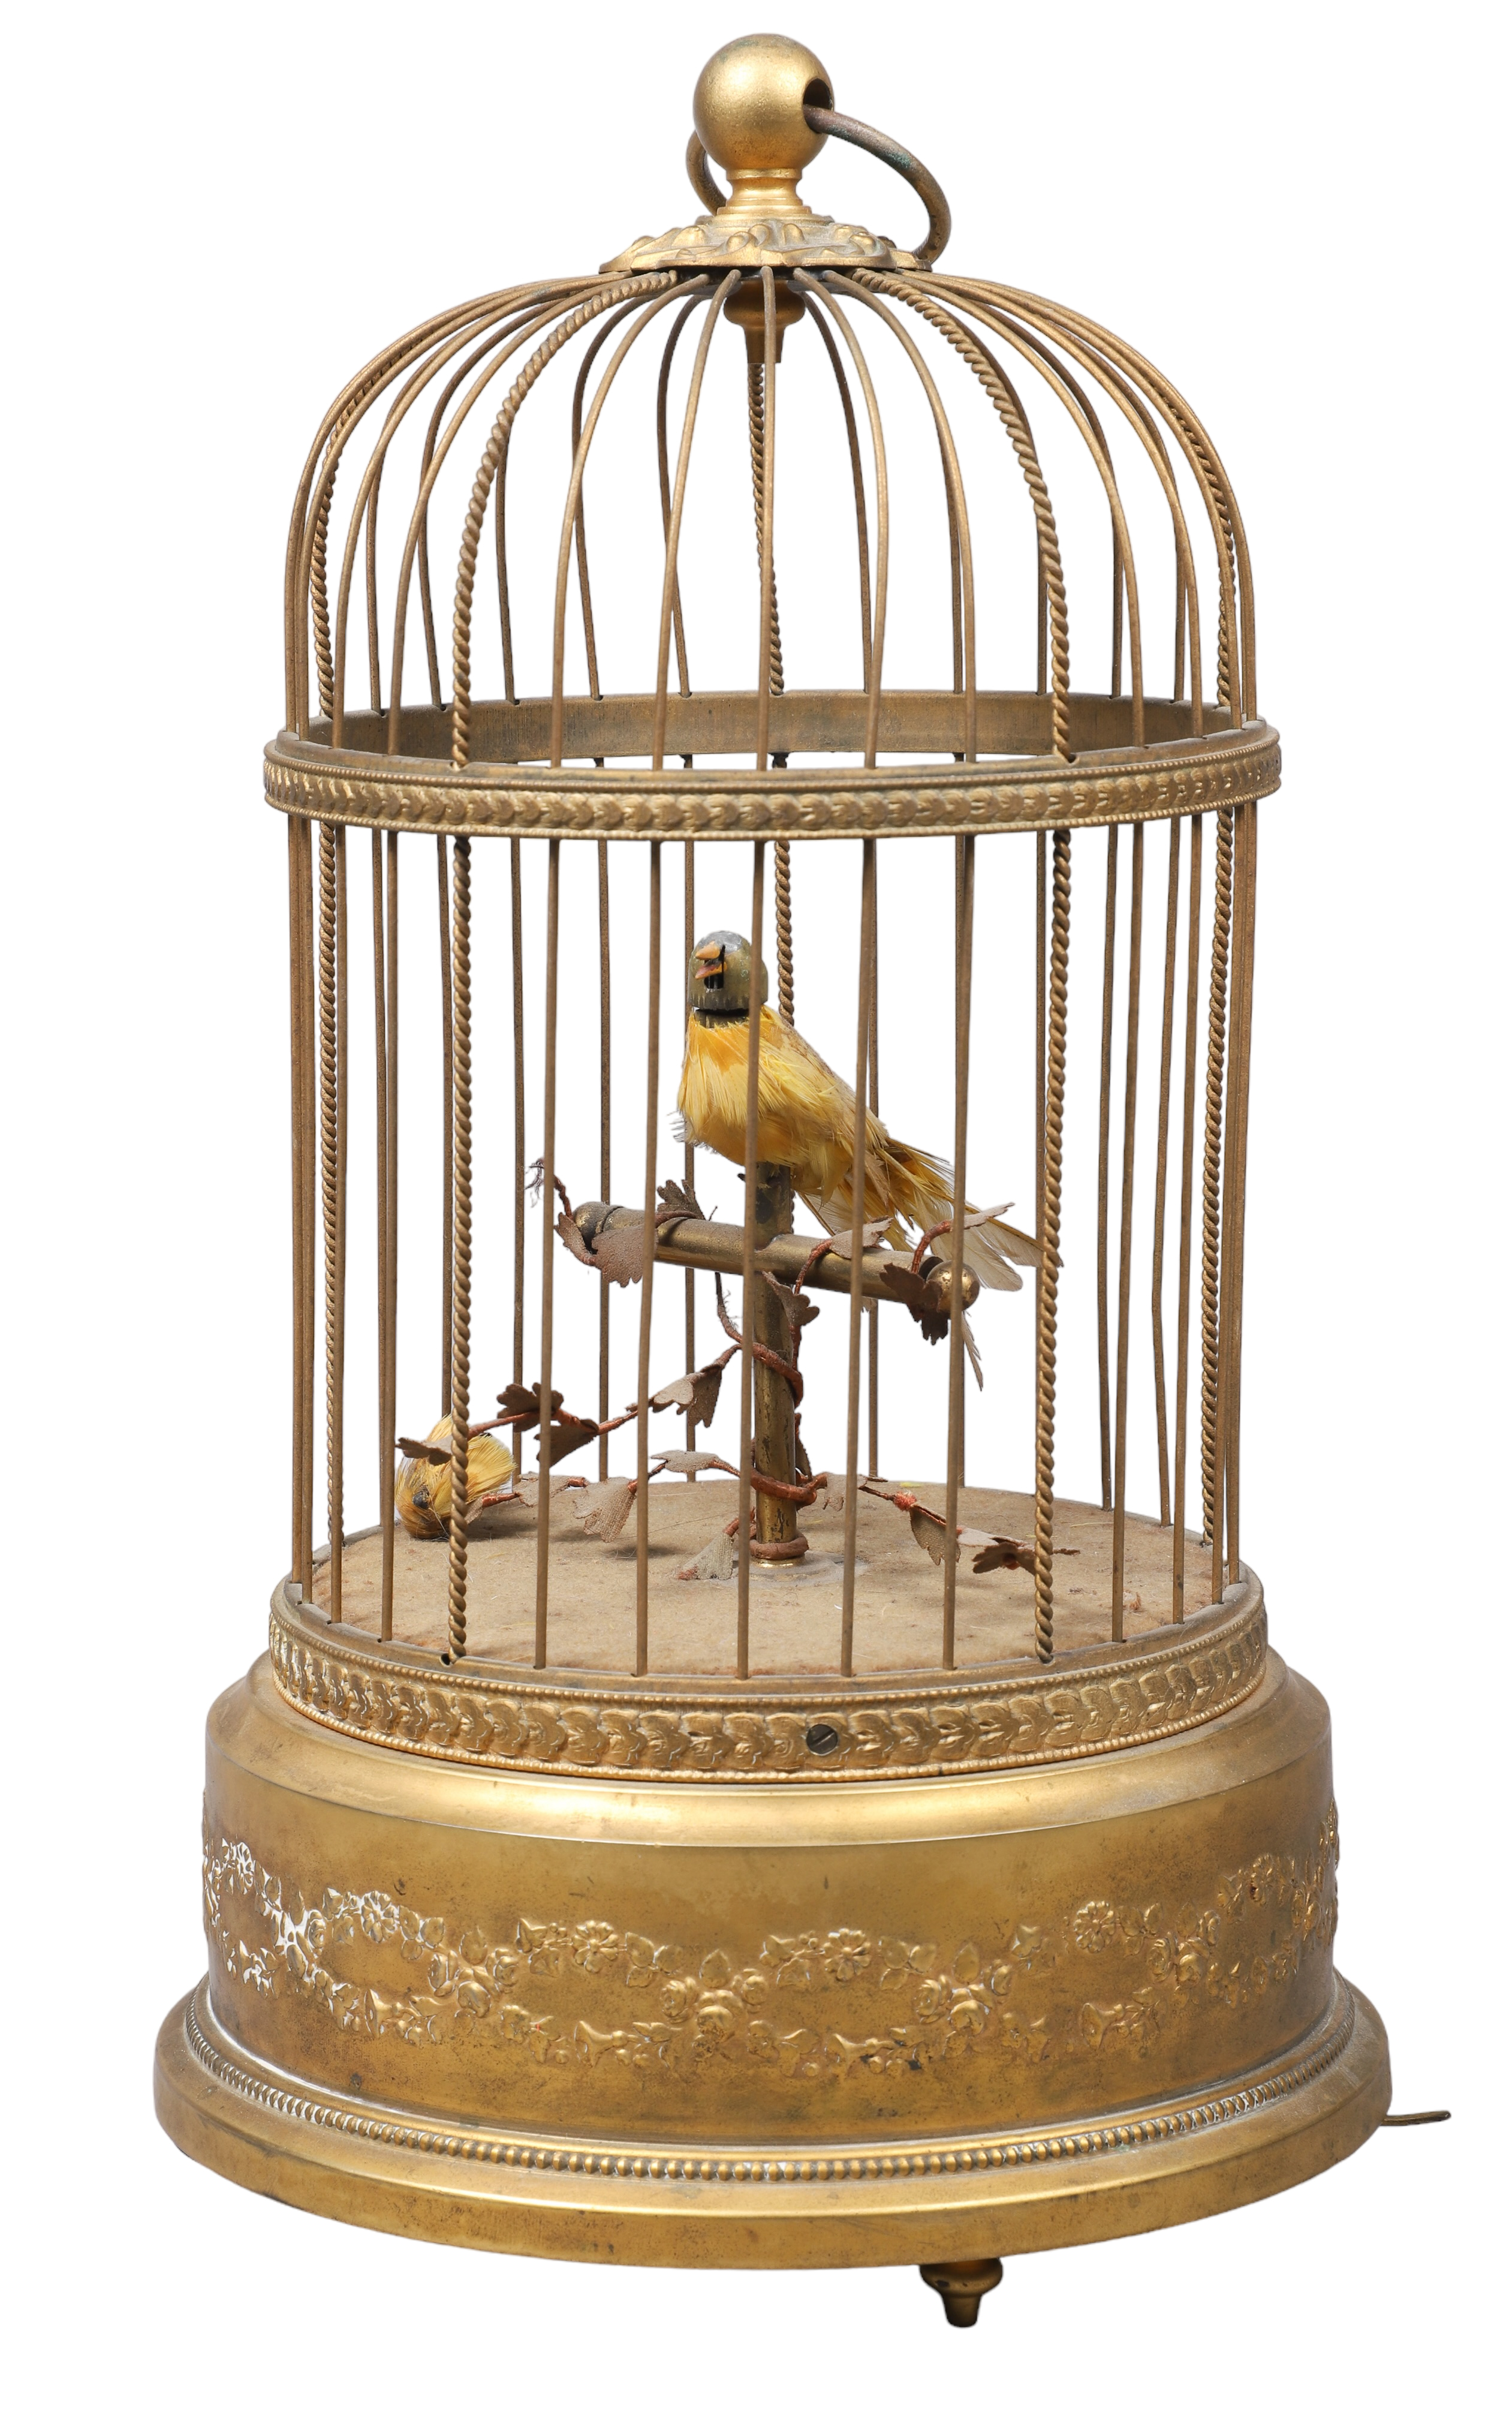 Automaton bird in gilded cage,